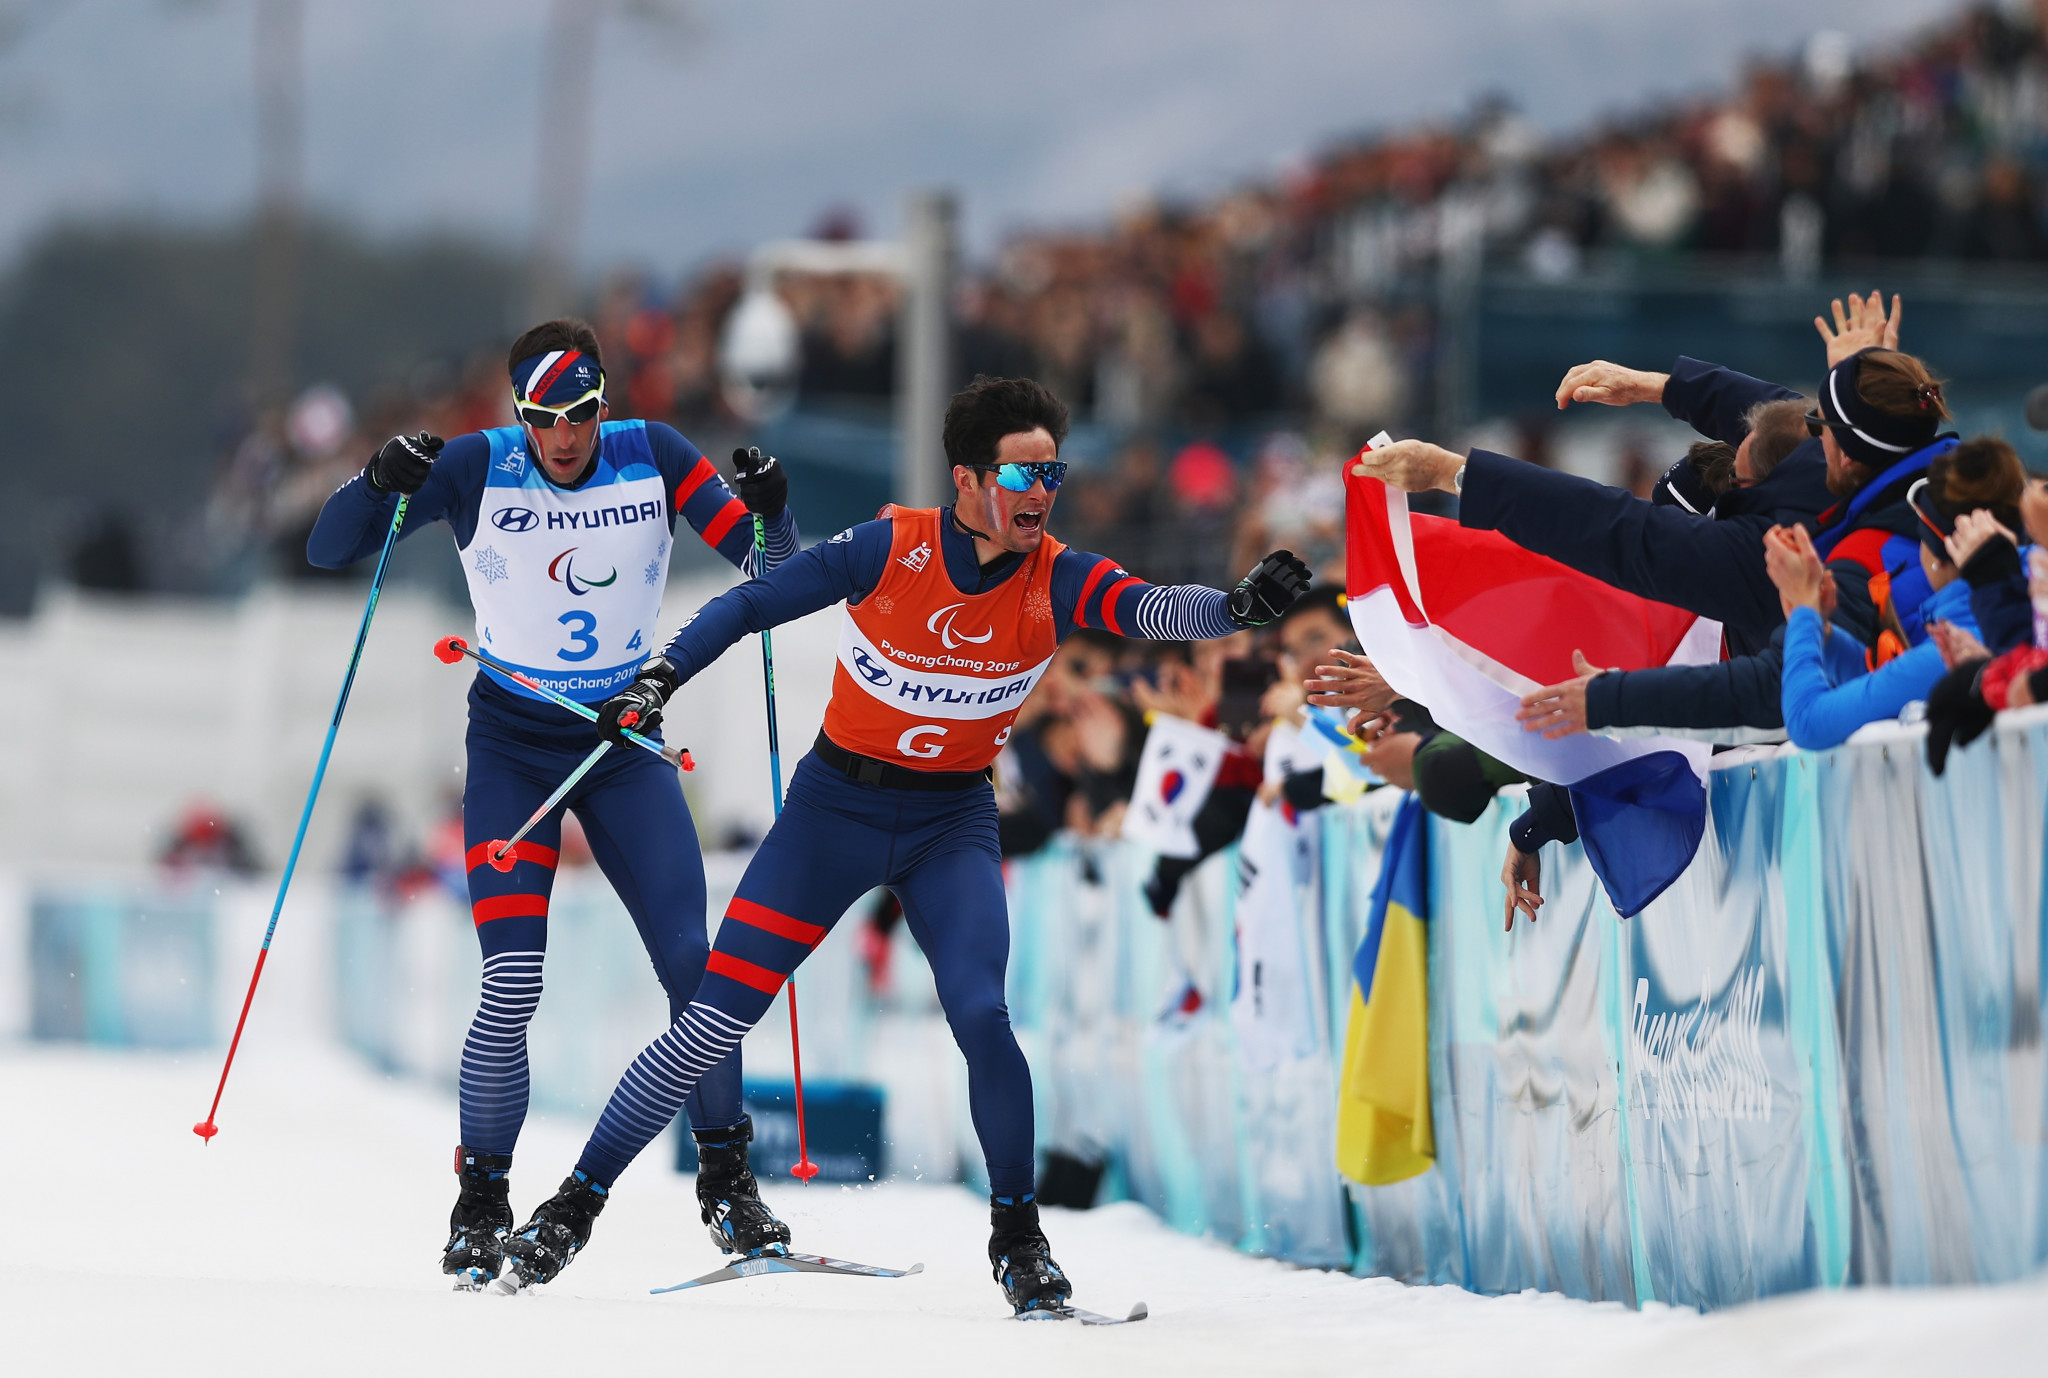 Thomas Clarion and his guide Antoine Bollet of France collect a flag before crossing the finish line in the 4x2.5km open relay competition ©Getty Images